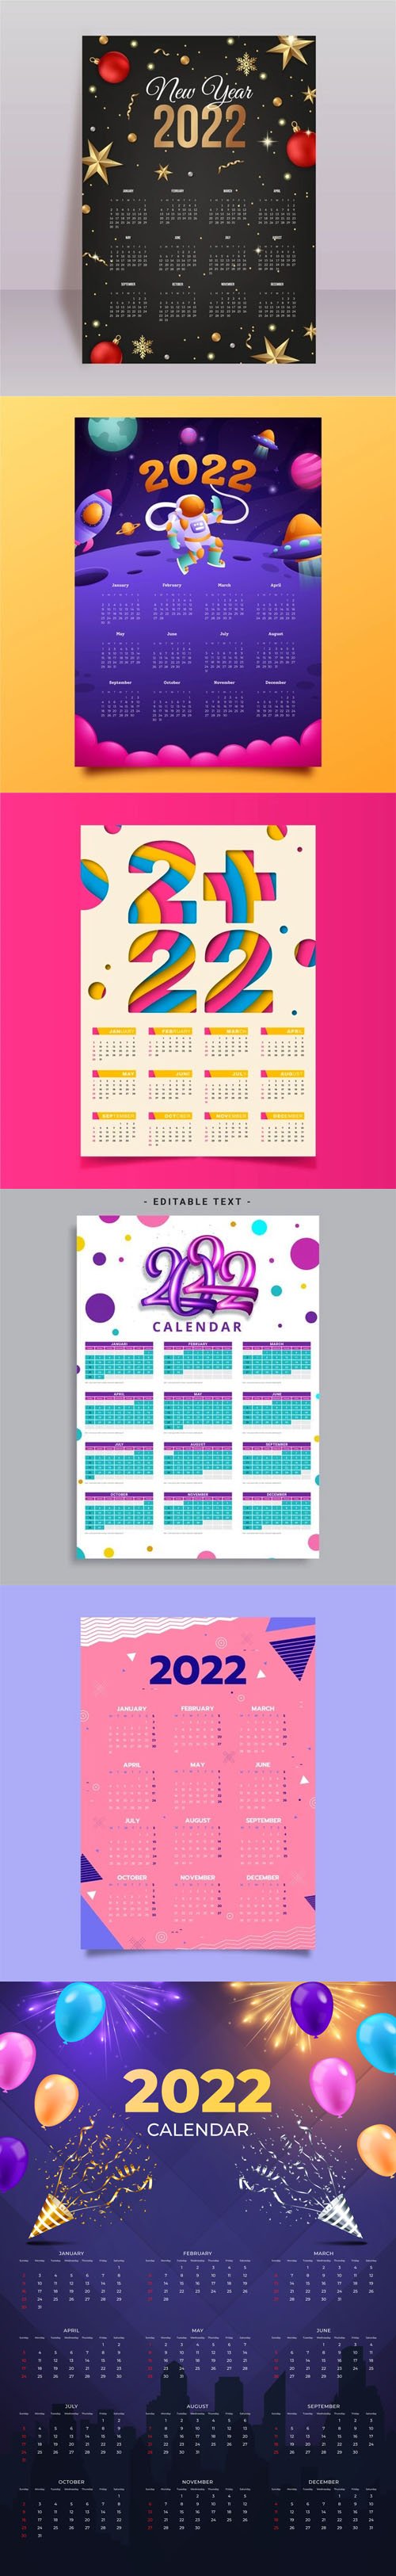 6 Realistic New Year 2022 Calendars Vector Templates